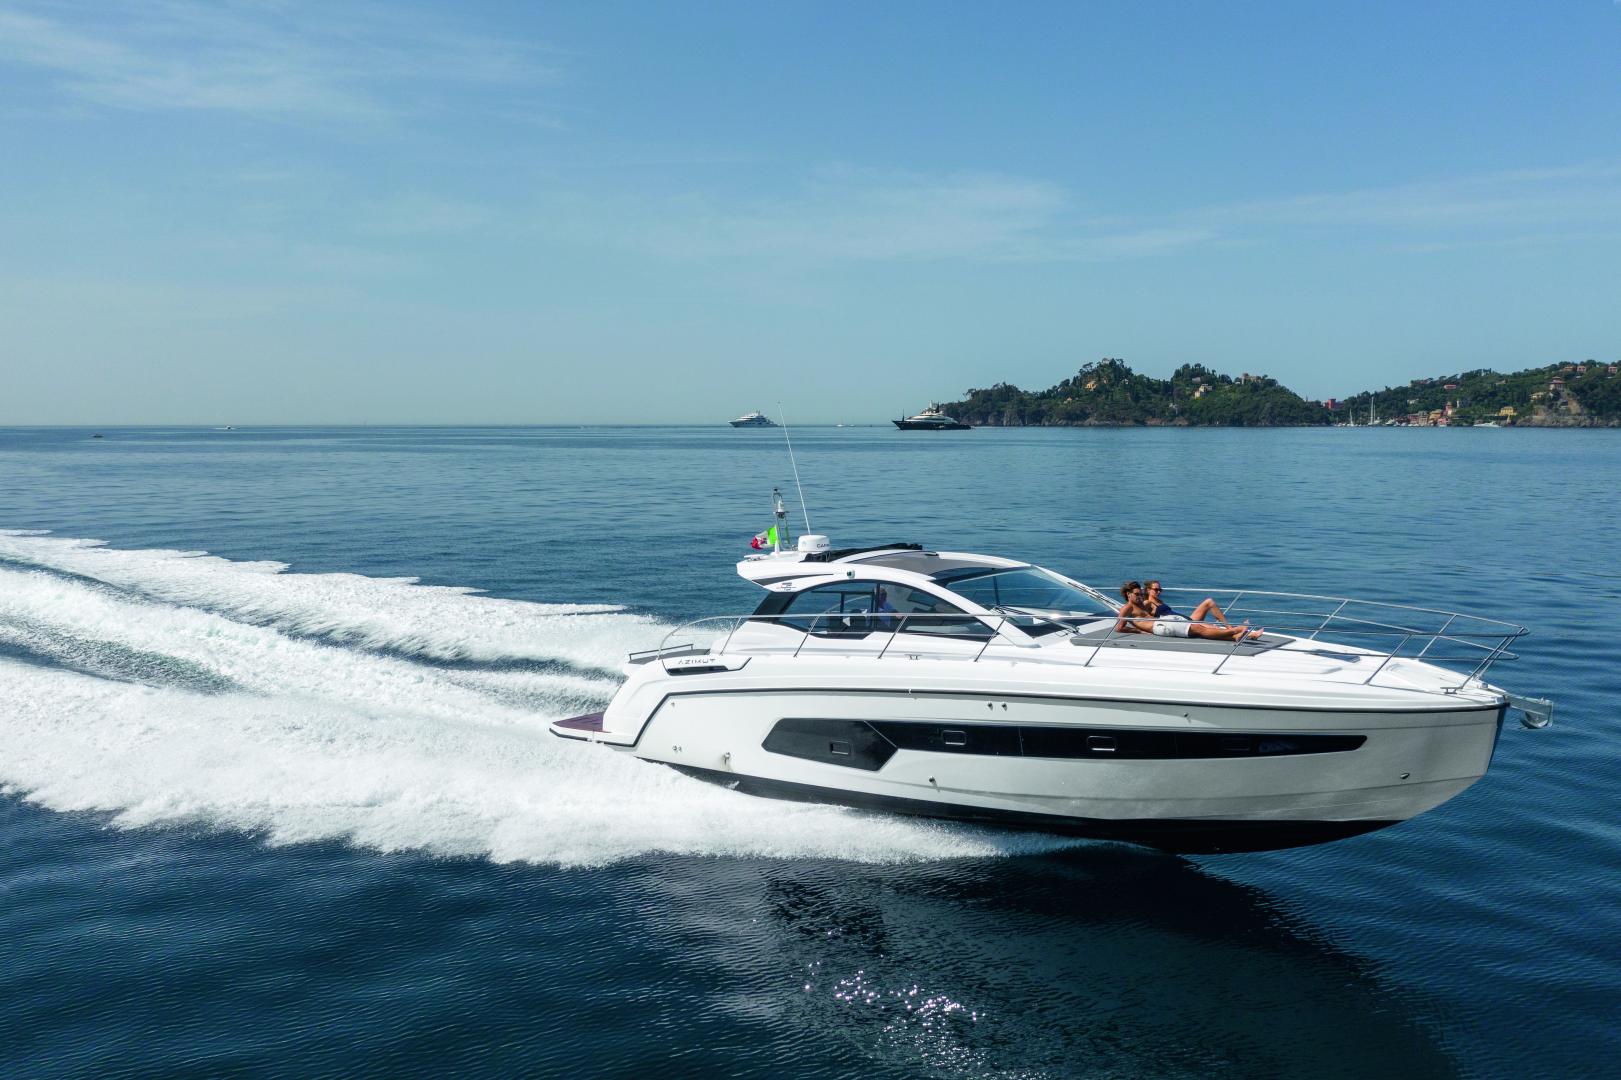 Always the pioneer: Volvo Penta’s Assisted Docking system set to confirm Azimut Yachts rule the waves